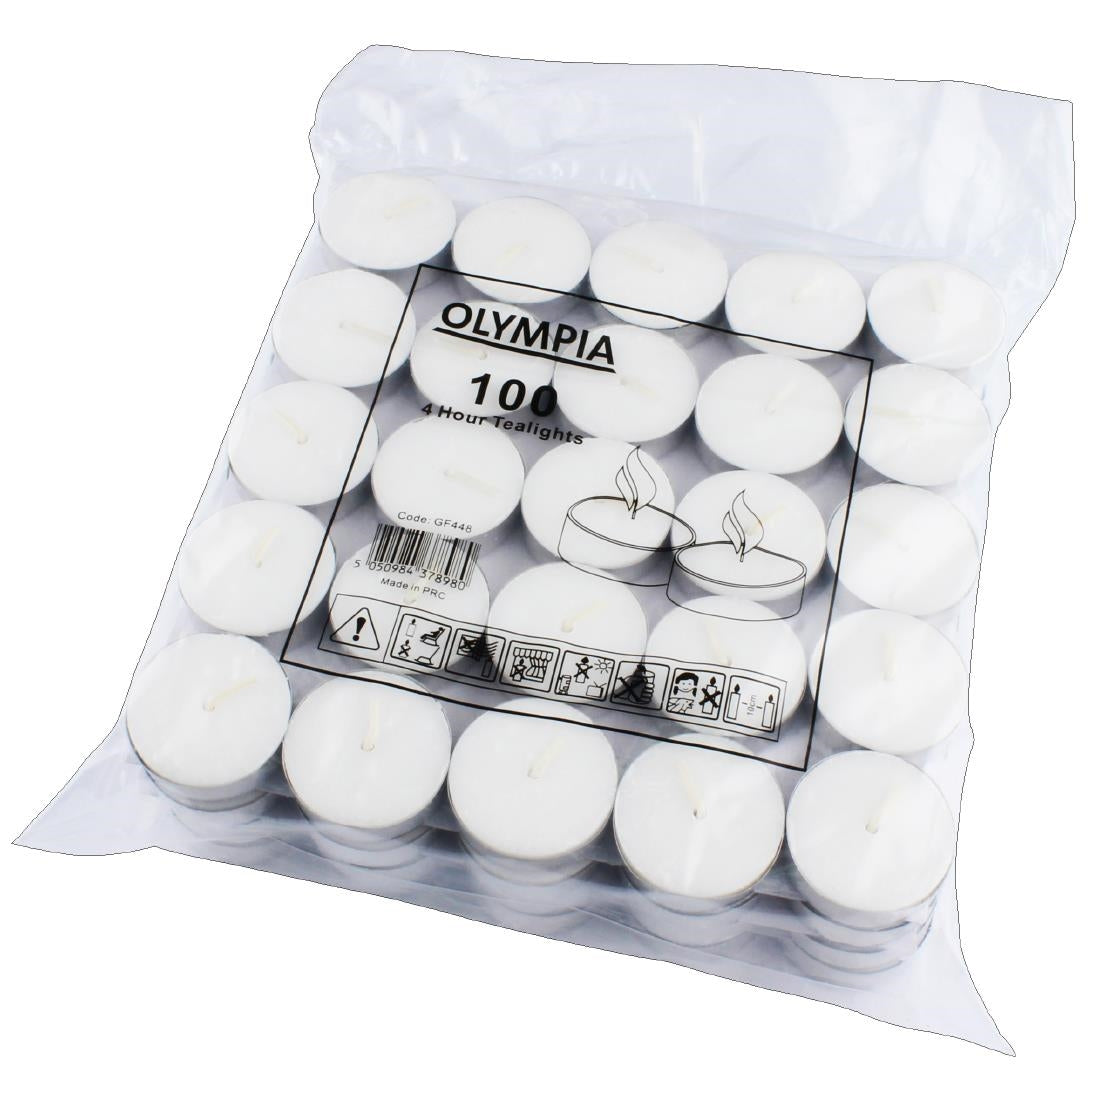 (Availability 22/02/24) GF448 Olympia 4 Hour Tealights (Pack of 100) JD Catering Equipment Solutions Ltd